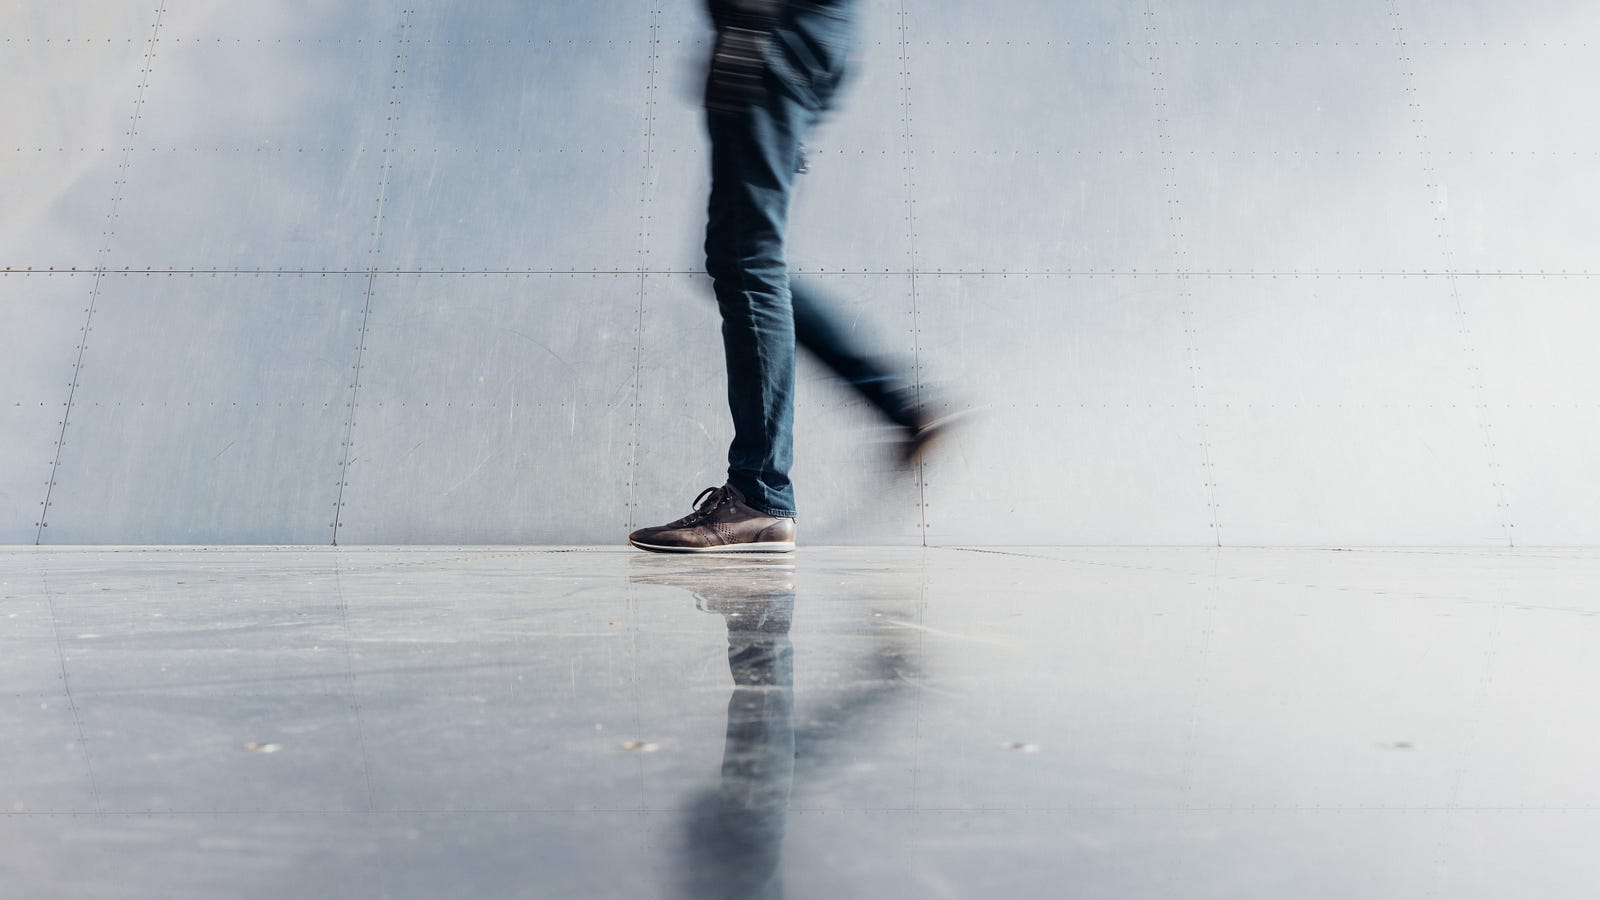 A man walks in the distance from right to left. We see a building wall in the background. The image is blurry and we see the man from waist level down. Physical activity can facilitate good sleep.